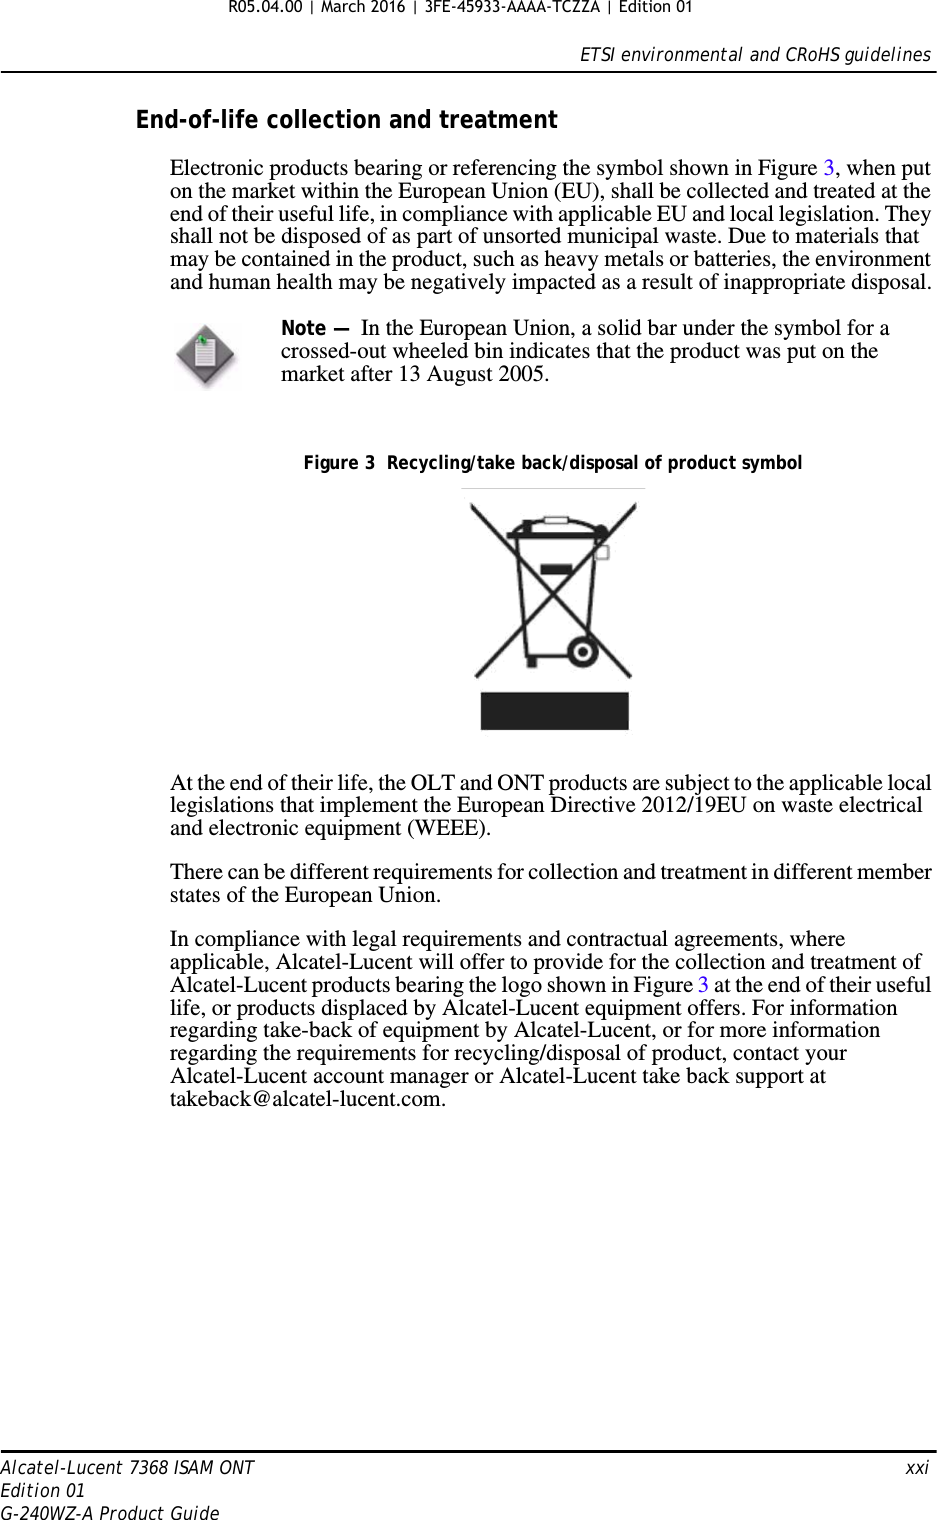 ETSI environmental and CRoHS guidelinesAlcatel-Lucent 7368 ISAM ONT   xxiEdition 01G-240WZ-A Product GuideEnd-of-life collection and treatmentElectronic products bearing or referencing the symbol shown in Figure 3, when put on the market within the European Union (EU), shall be collected and treated at the end of their useful life, in compliance with applicable EU and local legislation. They shall not be disposed of as part of unsorted municipal waste. Due to materials that may be contained in the product, such as heavy metals or batteries, the environment and human health may be negatively impacted as a result of inappropriate disposal.Figure 3  Recycling/take back/disposal of product symbolAt the end of their life, the OLT and ONT products are subject to the applicable local legislations that implement the European Directive 2012/19EU on waste electrical and electronic equipment (WEEE).There can be different requirements for collection and treatment in different member states of the European Union. In compliance with legal requirements and contractual agreements, where applicable, Alcatel-Lucent will offer to provide for the collection and treatment of Alcatel-Lucent products bearing the logo shown in Figure 3 at the end of their useful life, or products displaced by Alcatel-Lucent equipment offers. For information regarding take-back of equipment by Alcatel-Lucent, or for more information regarding the requirements for recycling/disposal of product, contact your Alcatel-Lucent account manager or Alcatel-Lucent take back support at takeback@alcatel-lucent.com.Note —  In the European Union, a solid bar under the symbol for a crossed-out wheeled bin indicates that the product was put on the market after 13 August 2005.R05.04.00 | March 2016 | 3FE-45933-AAAA-TCZZA | Edition 01 